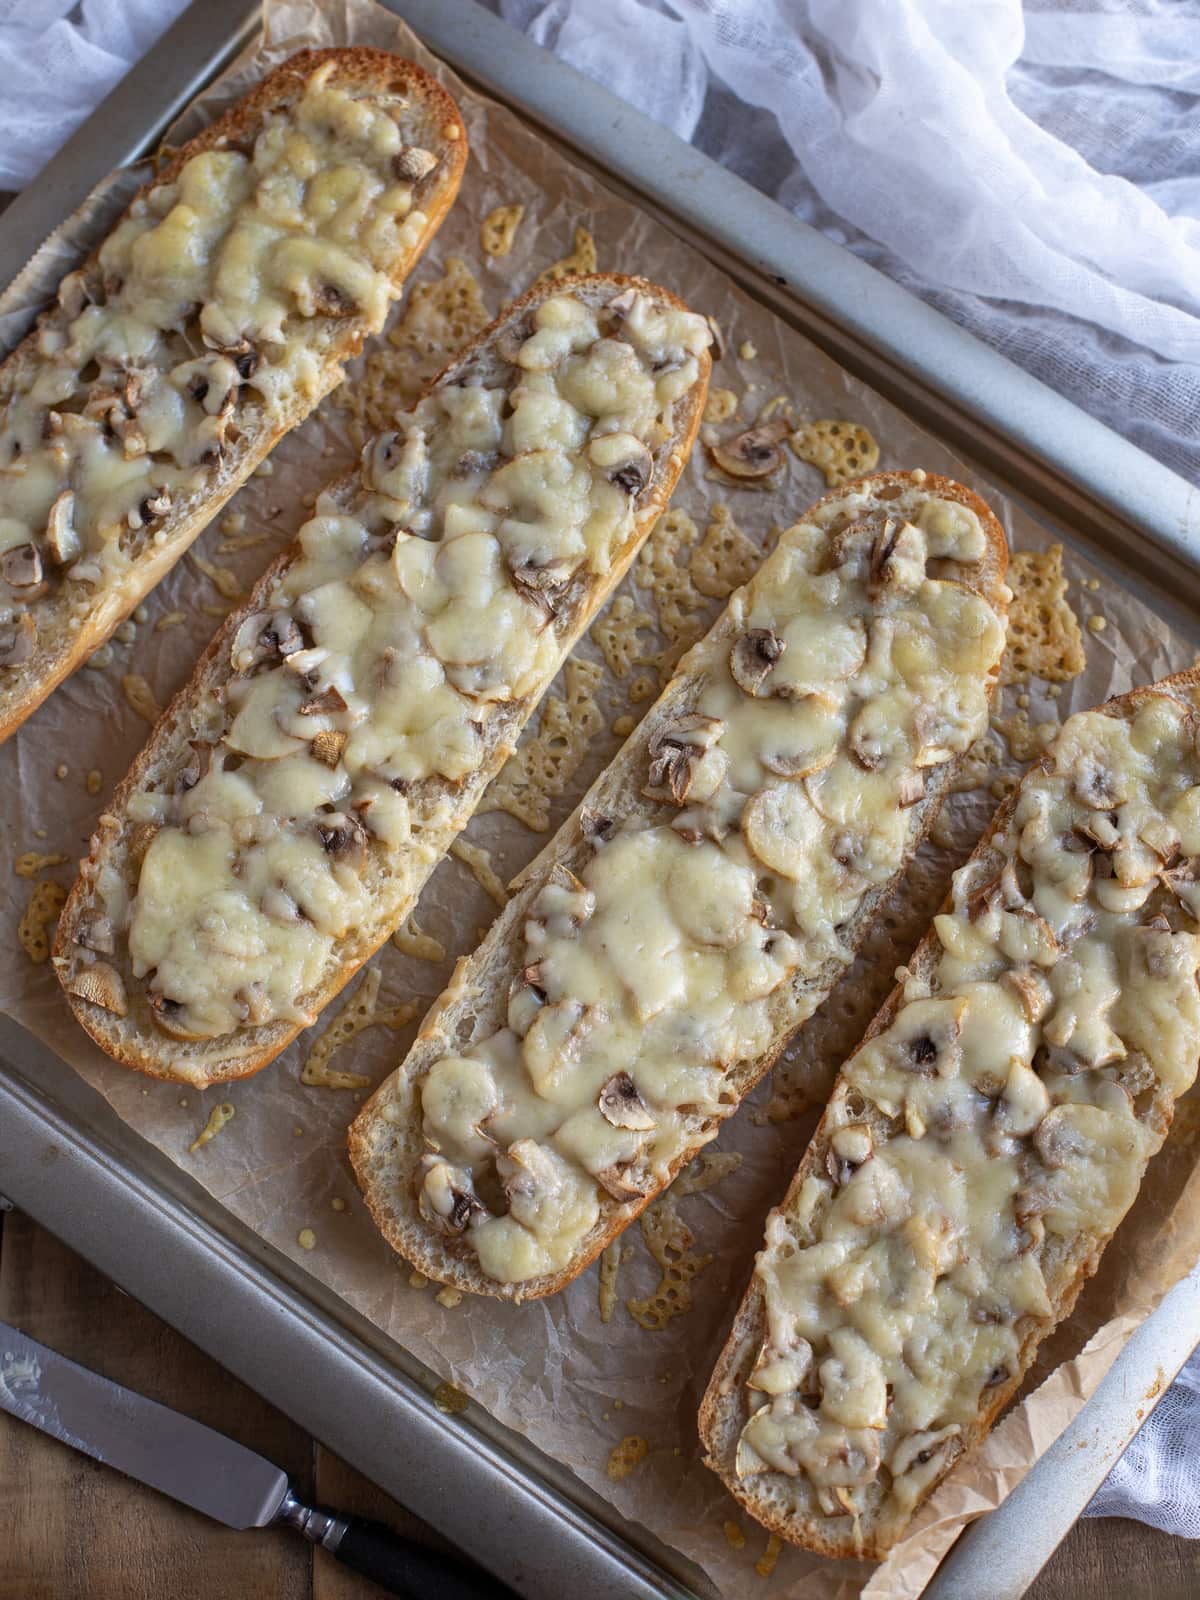 Toasted mushroom and cheese sandwiches.